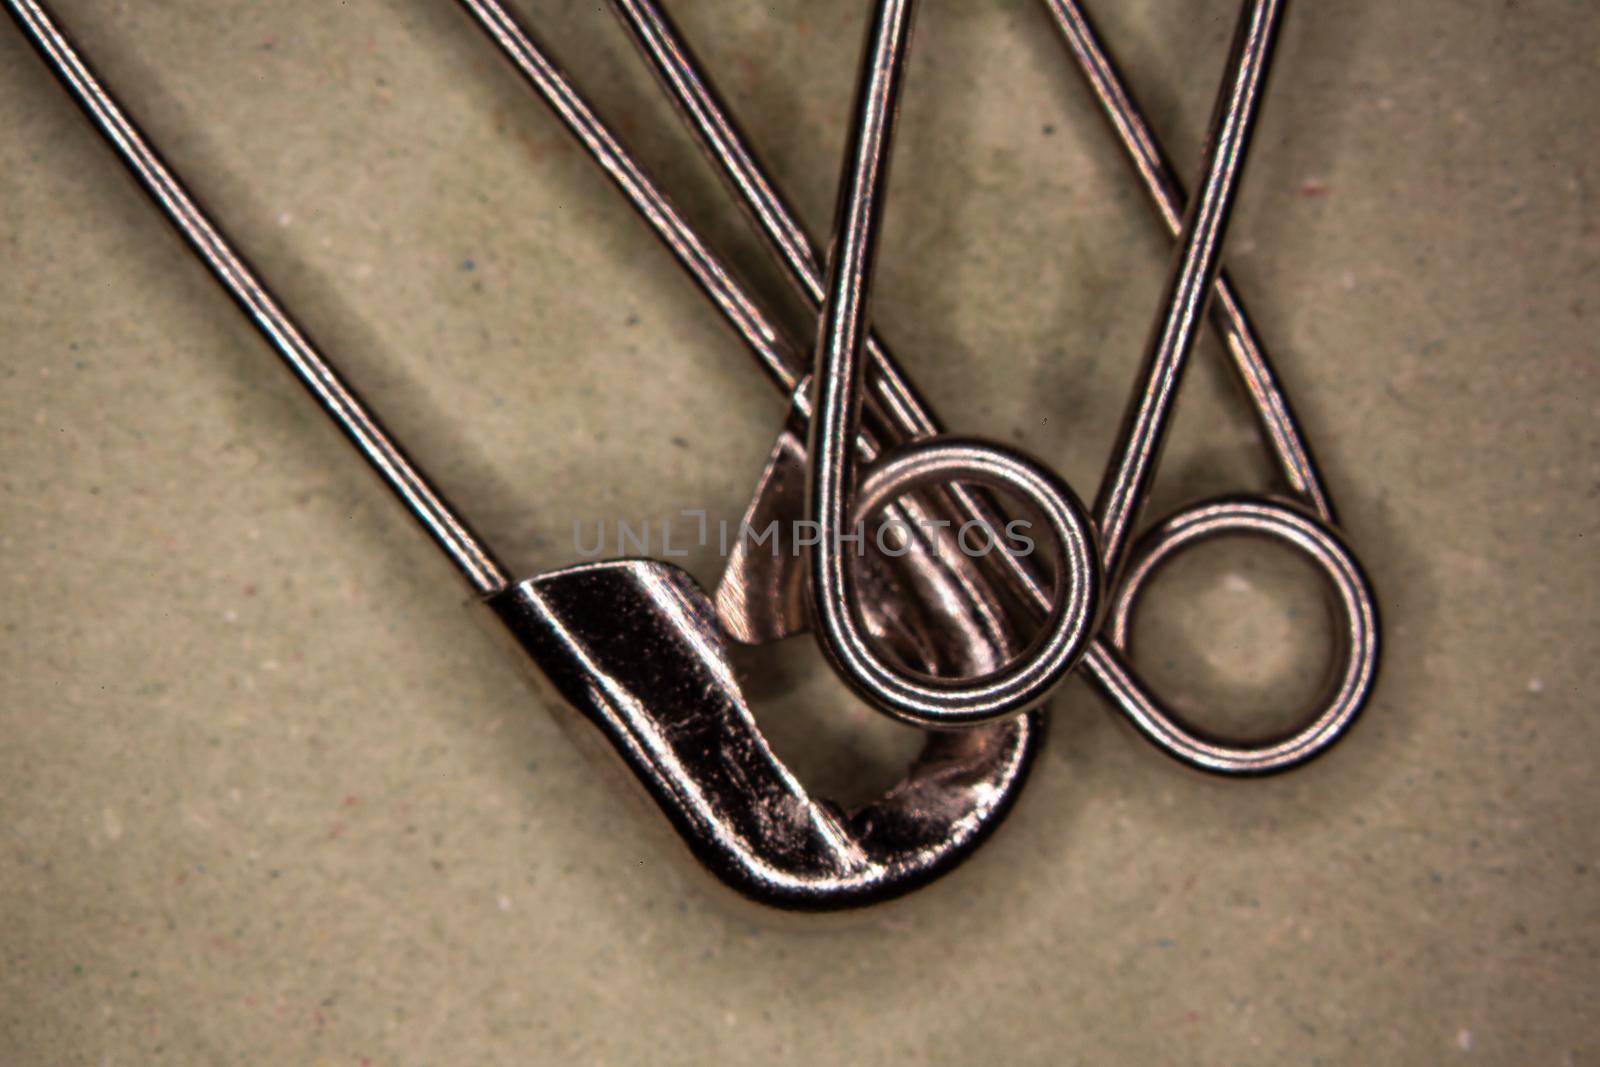 metallic safety pins in close-up